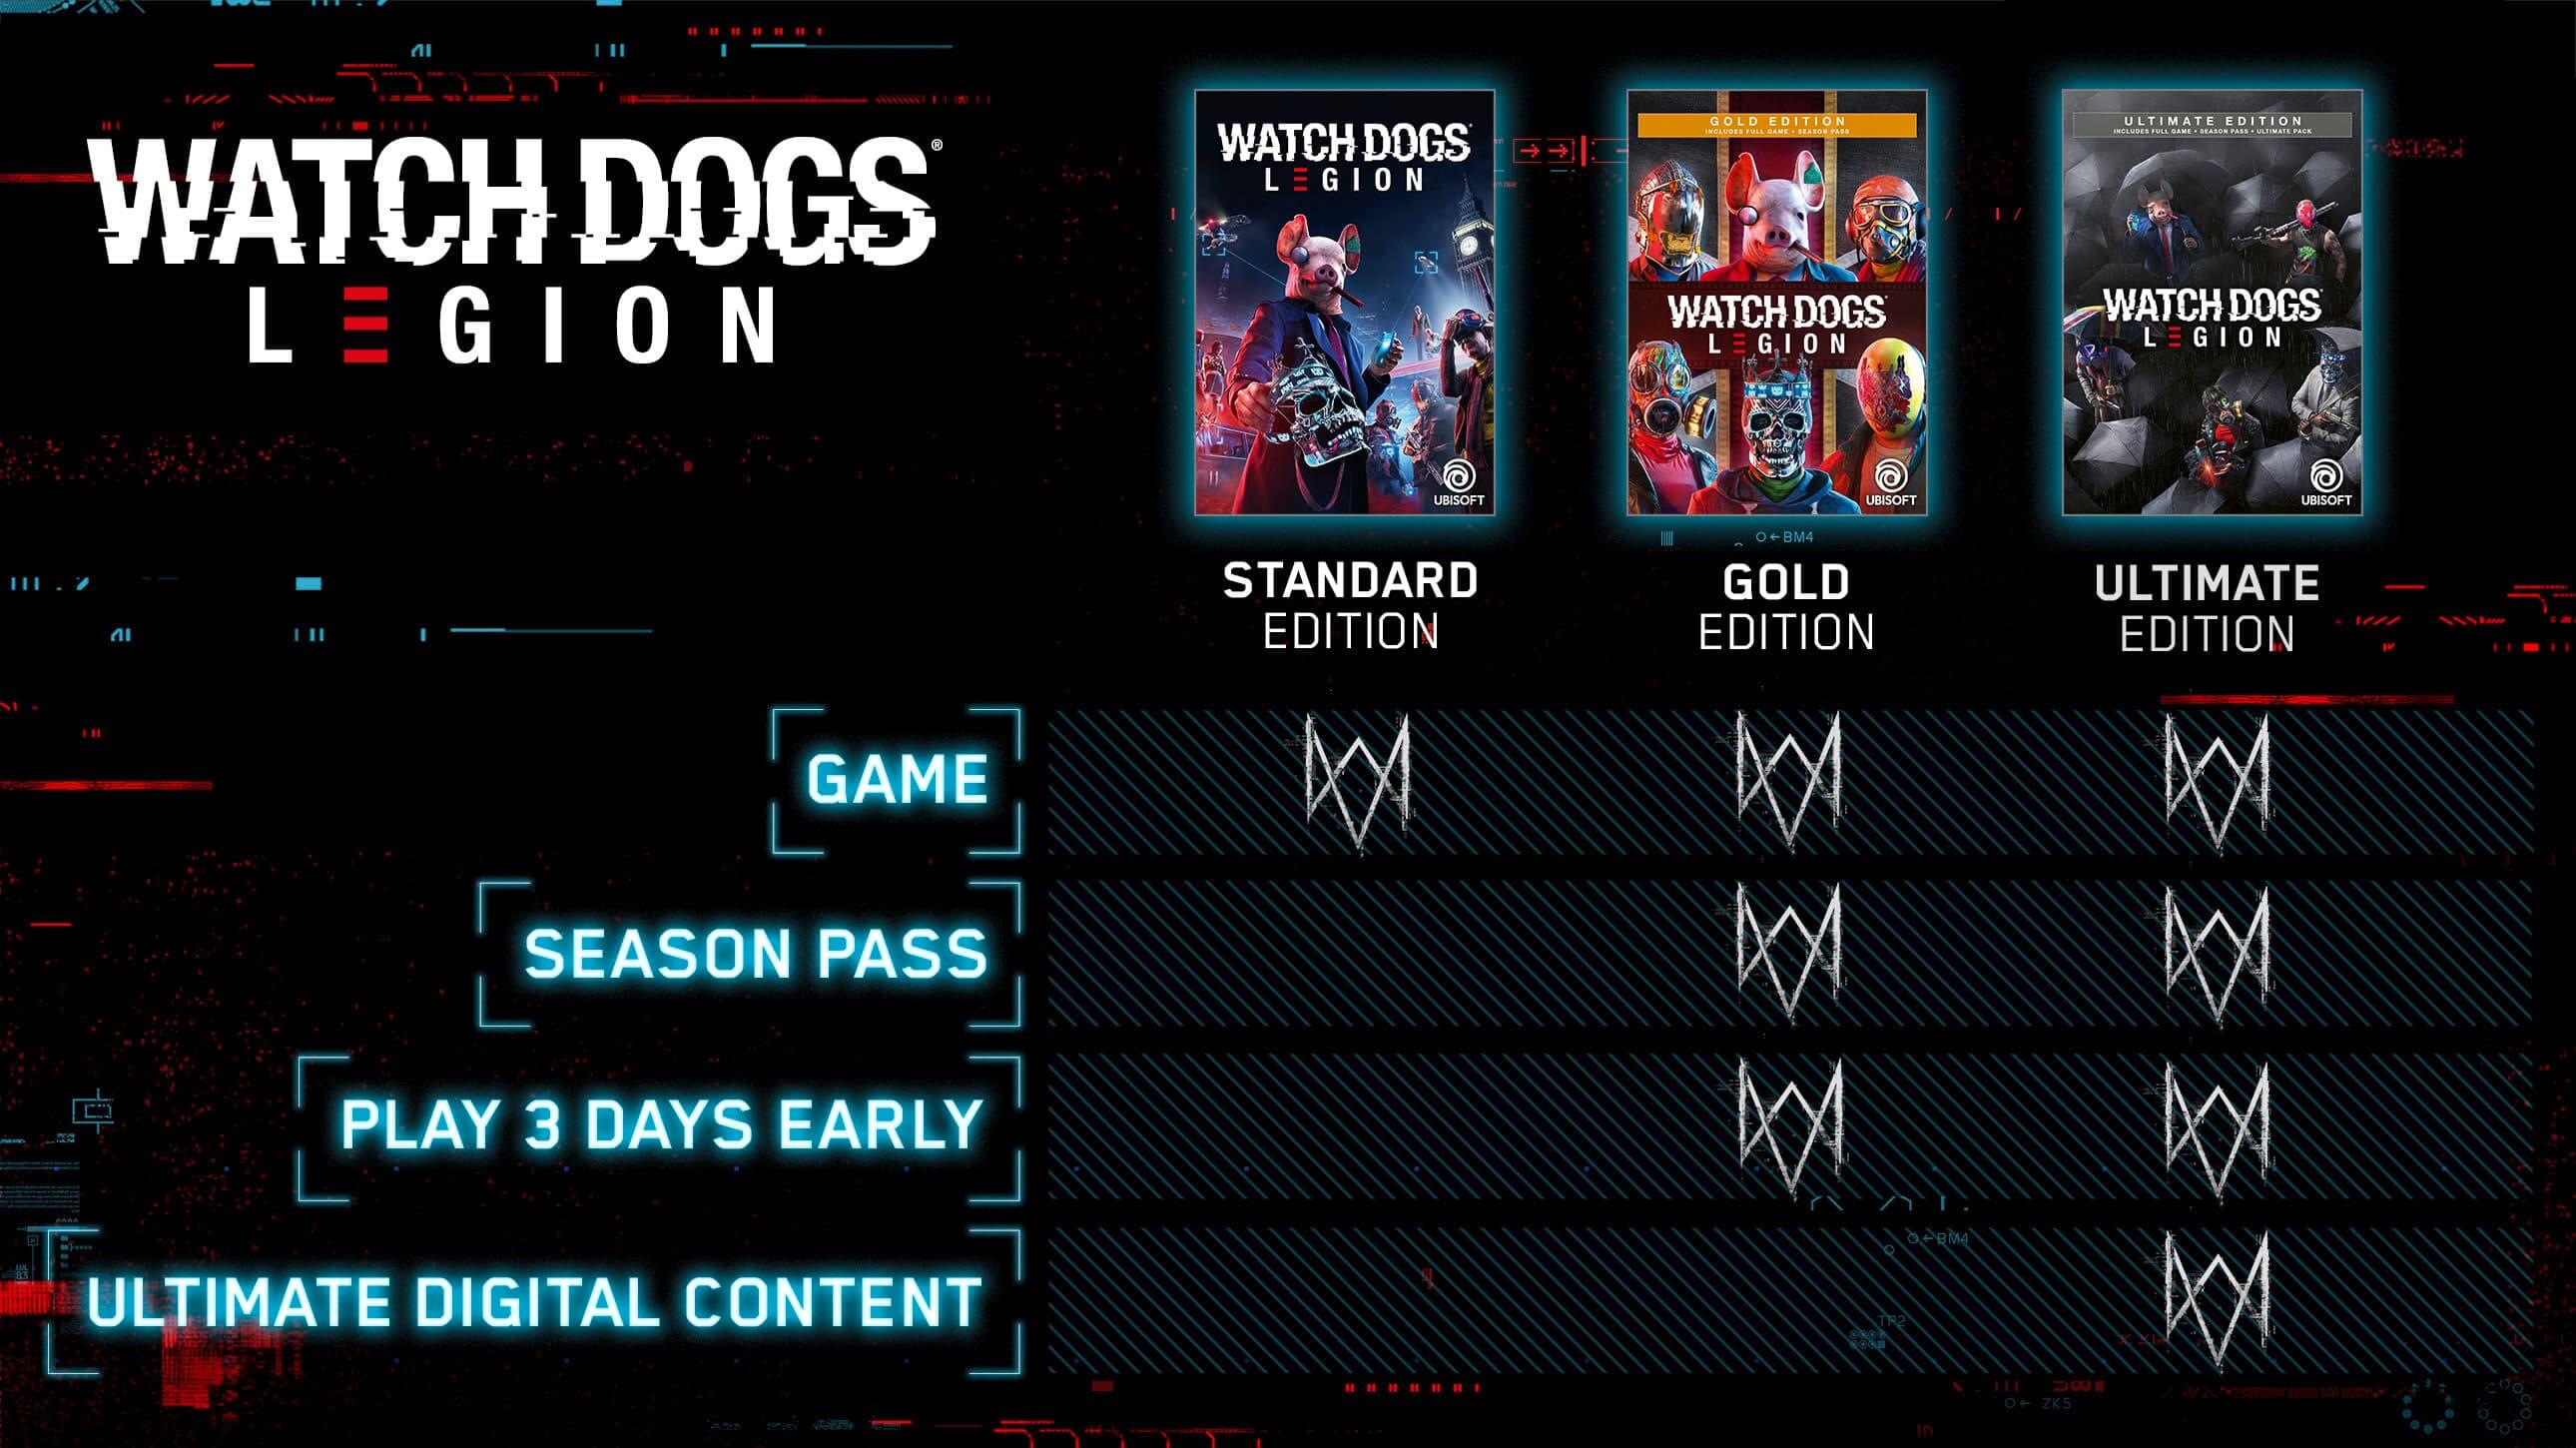 watch dogs 3 download for android